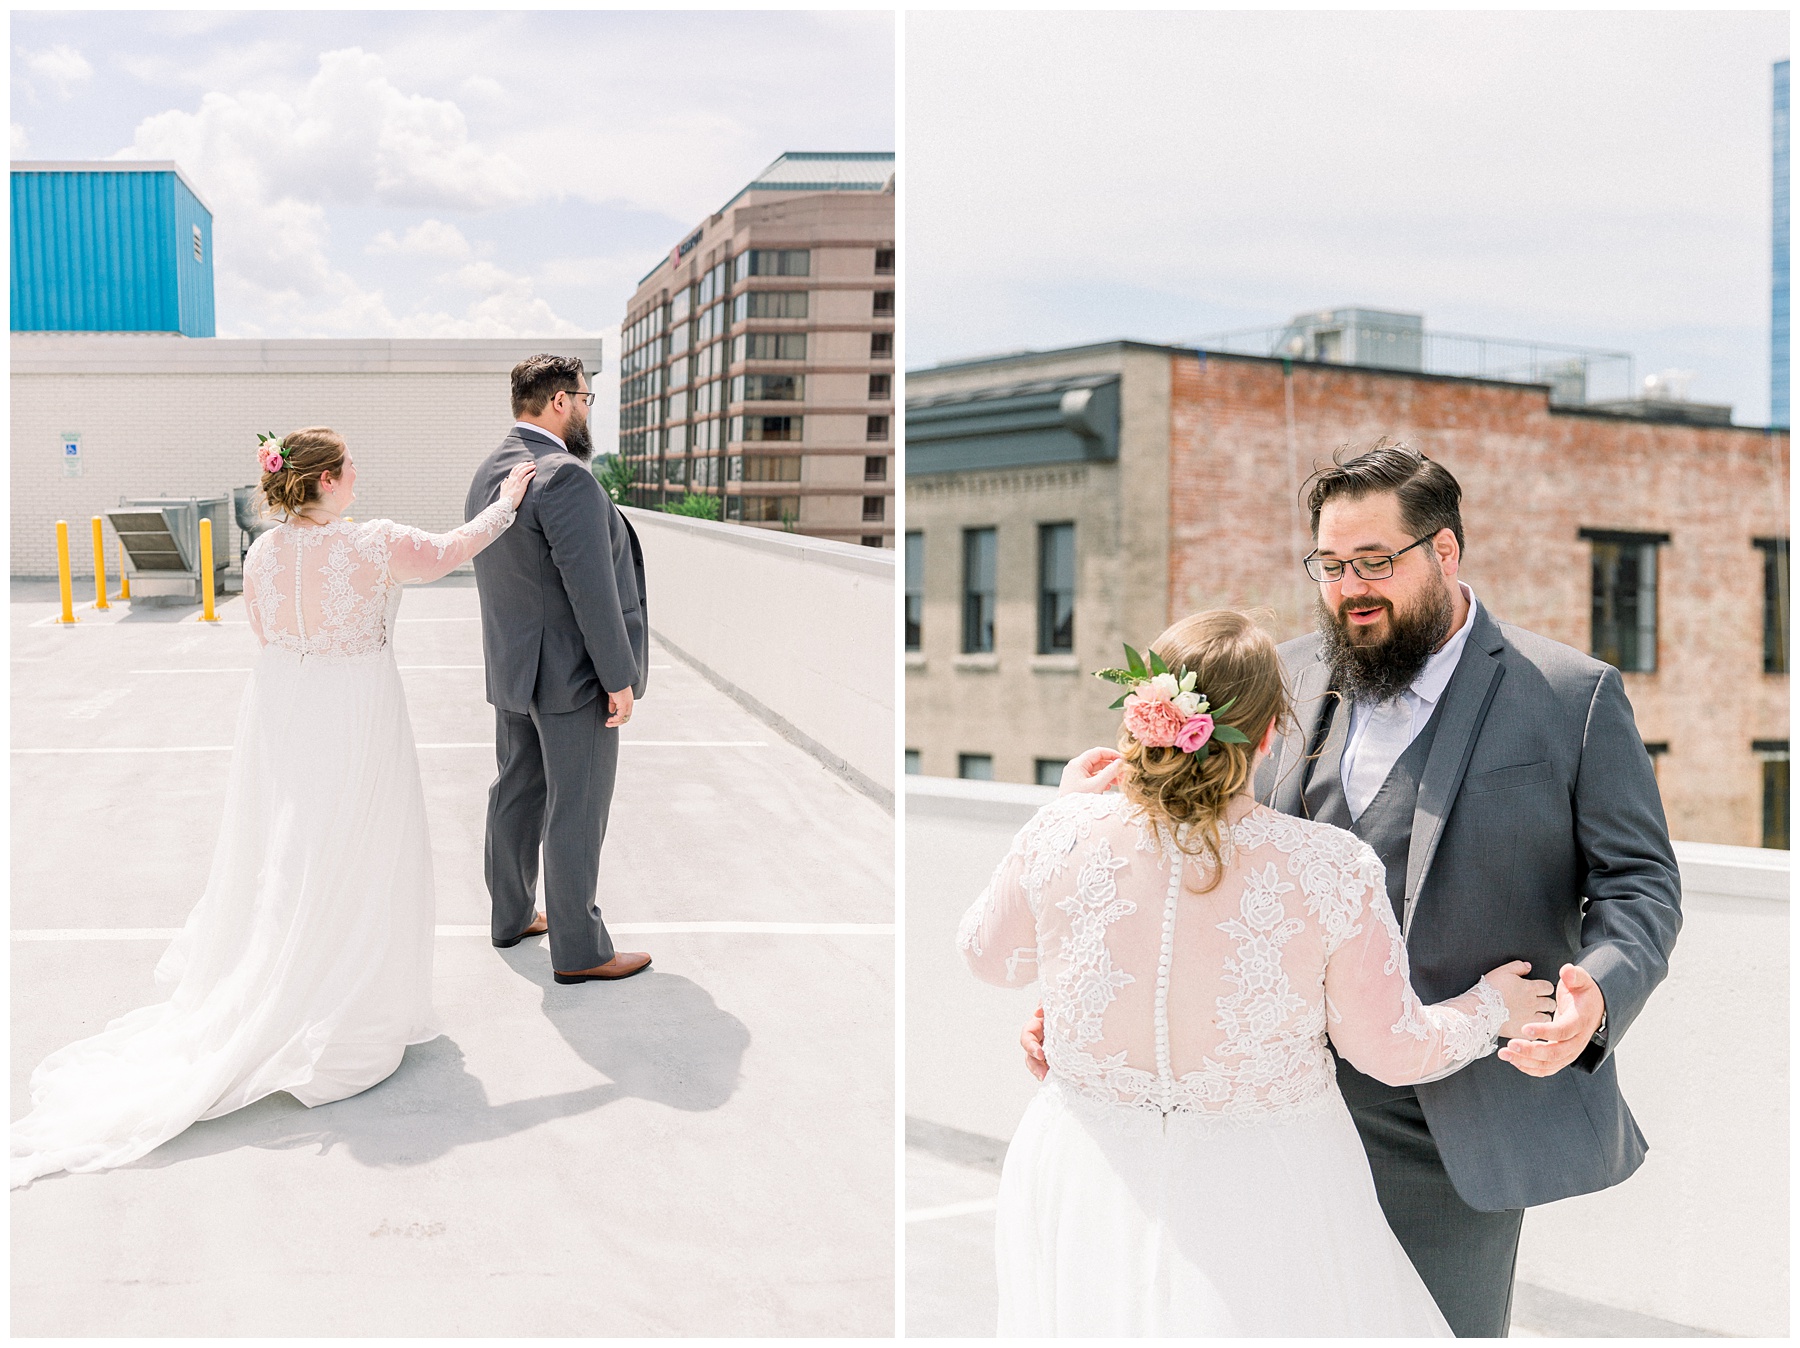 Blush Summer Wedding at Pine and Poplar in Durham North Carolina. Rooftop Bride and Groom First look